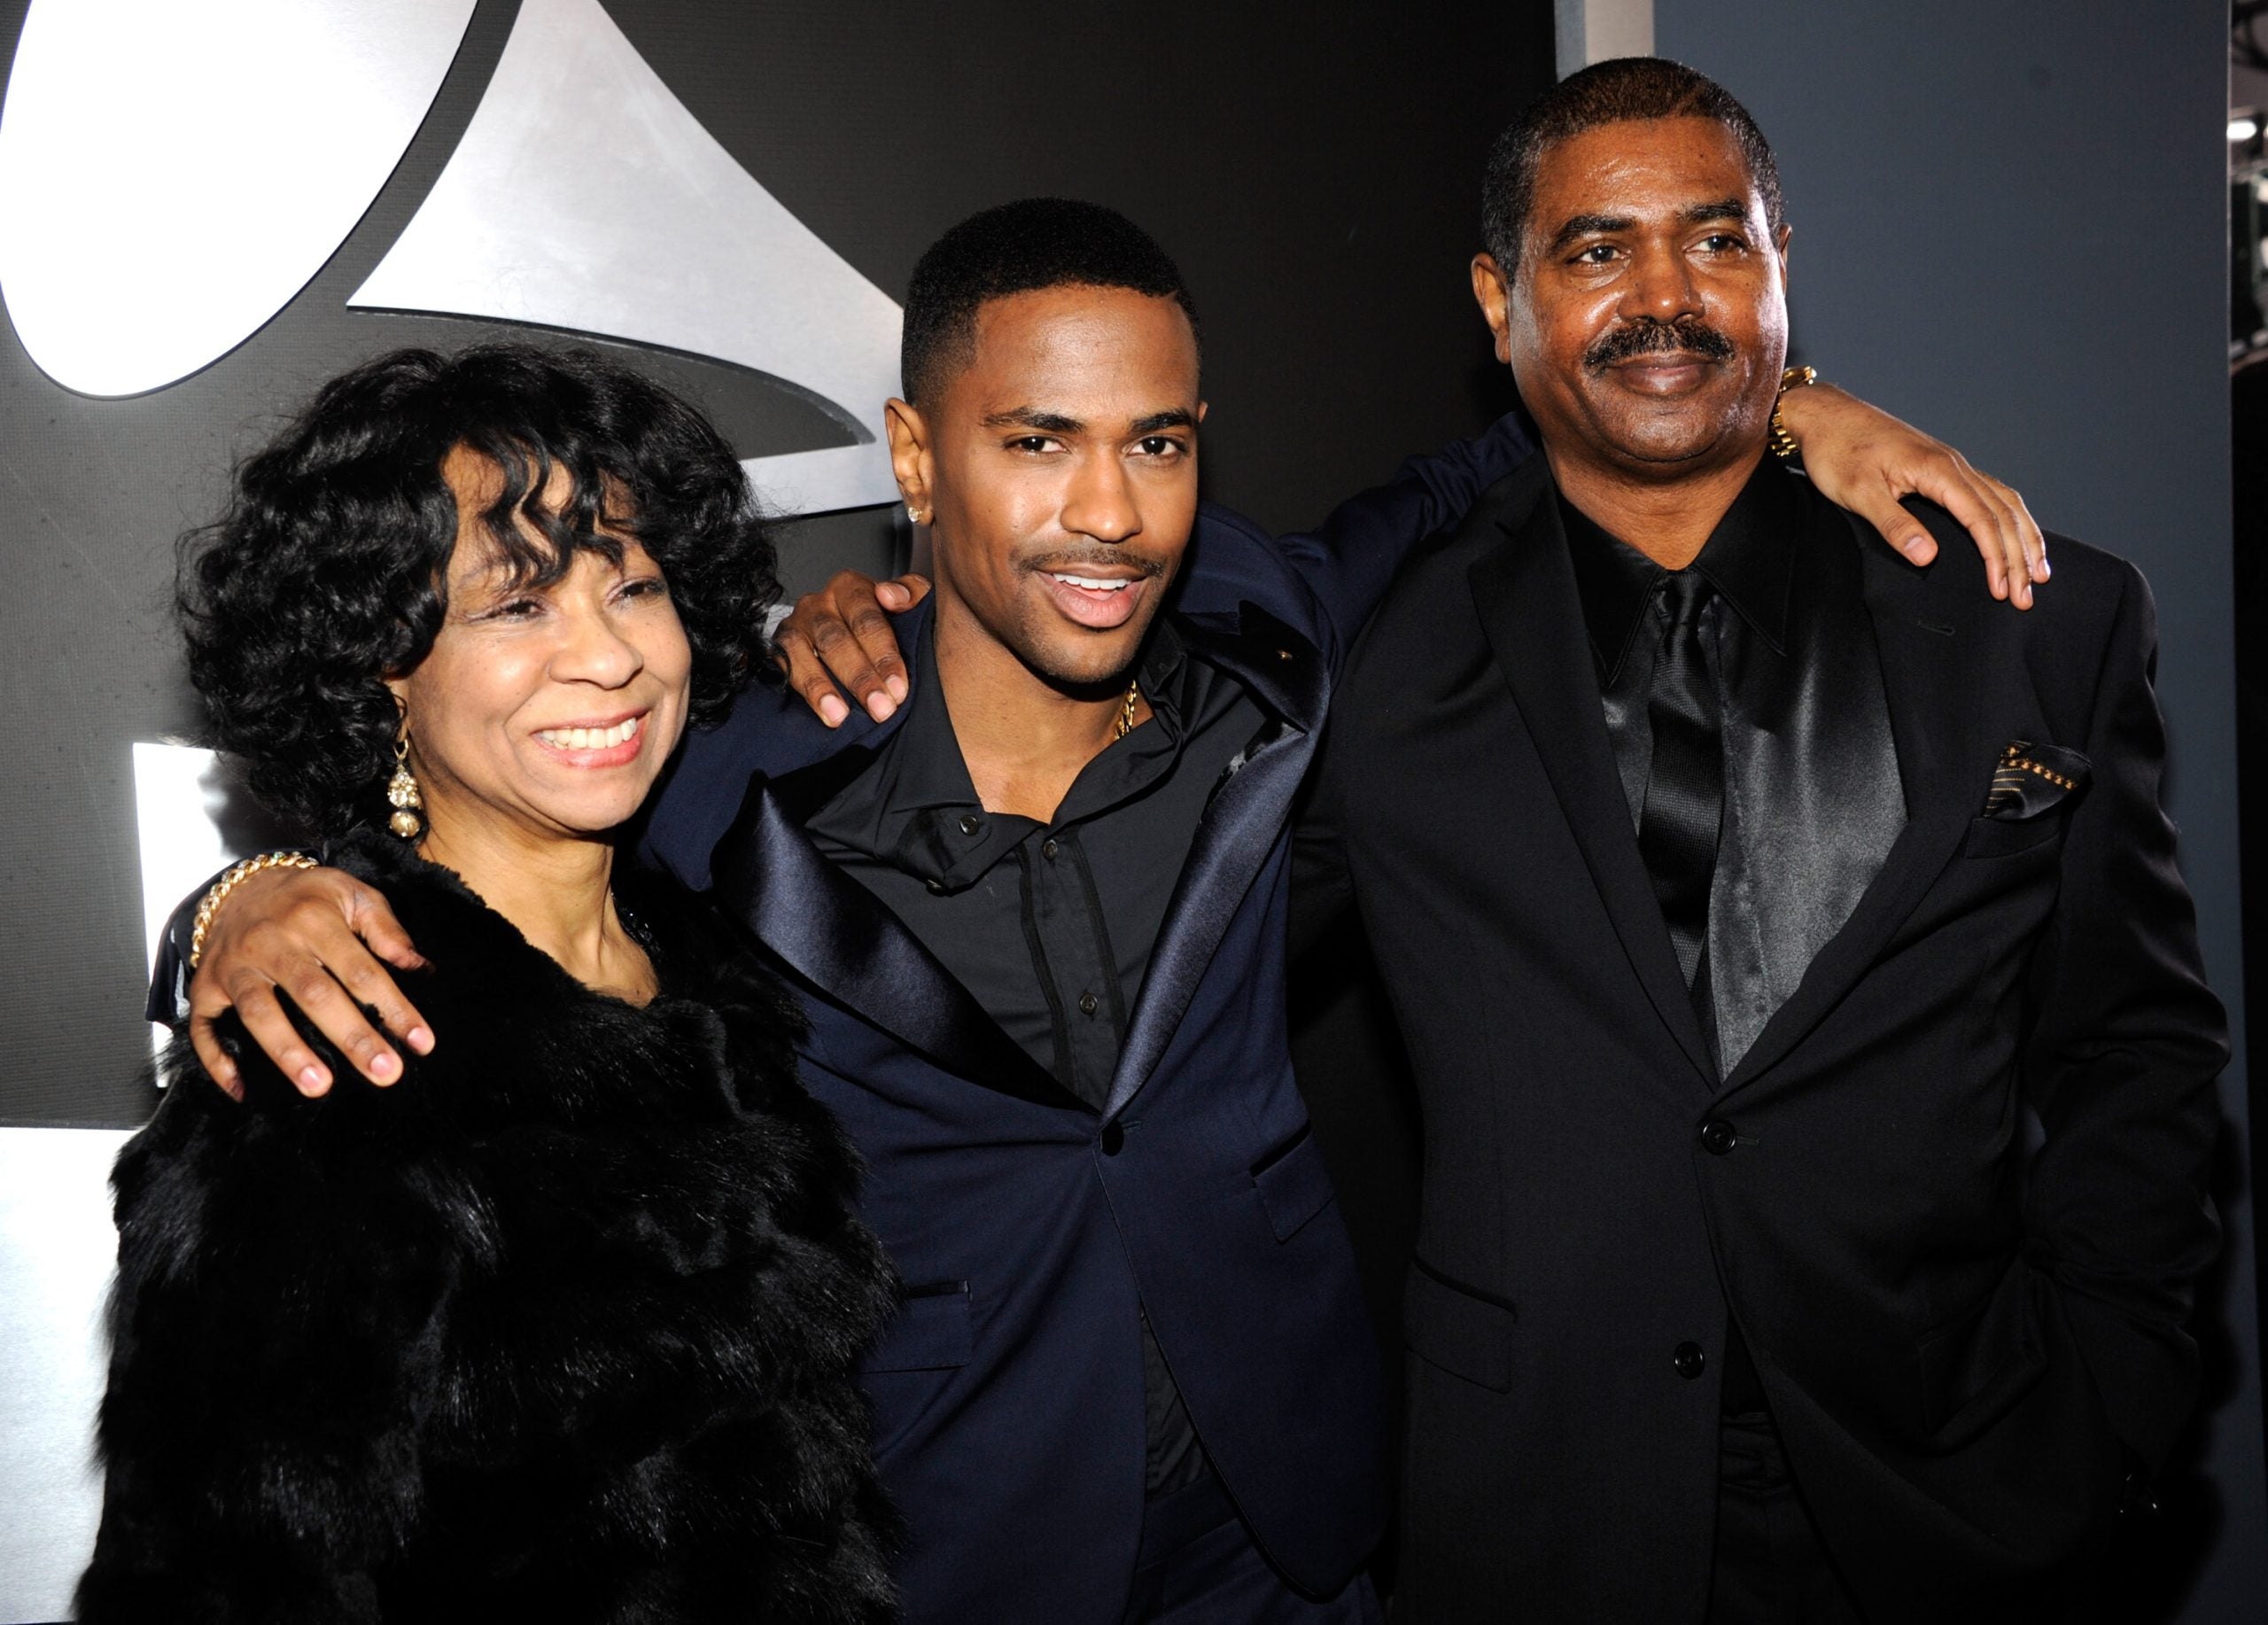 17 Photos Of Stars Attending The Grammys With Their Moms